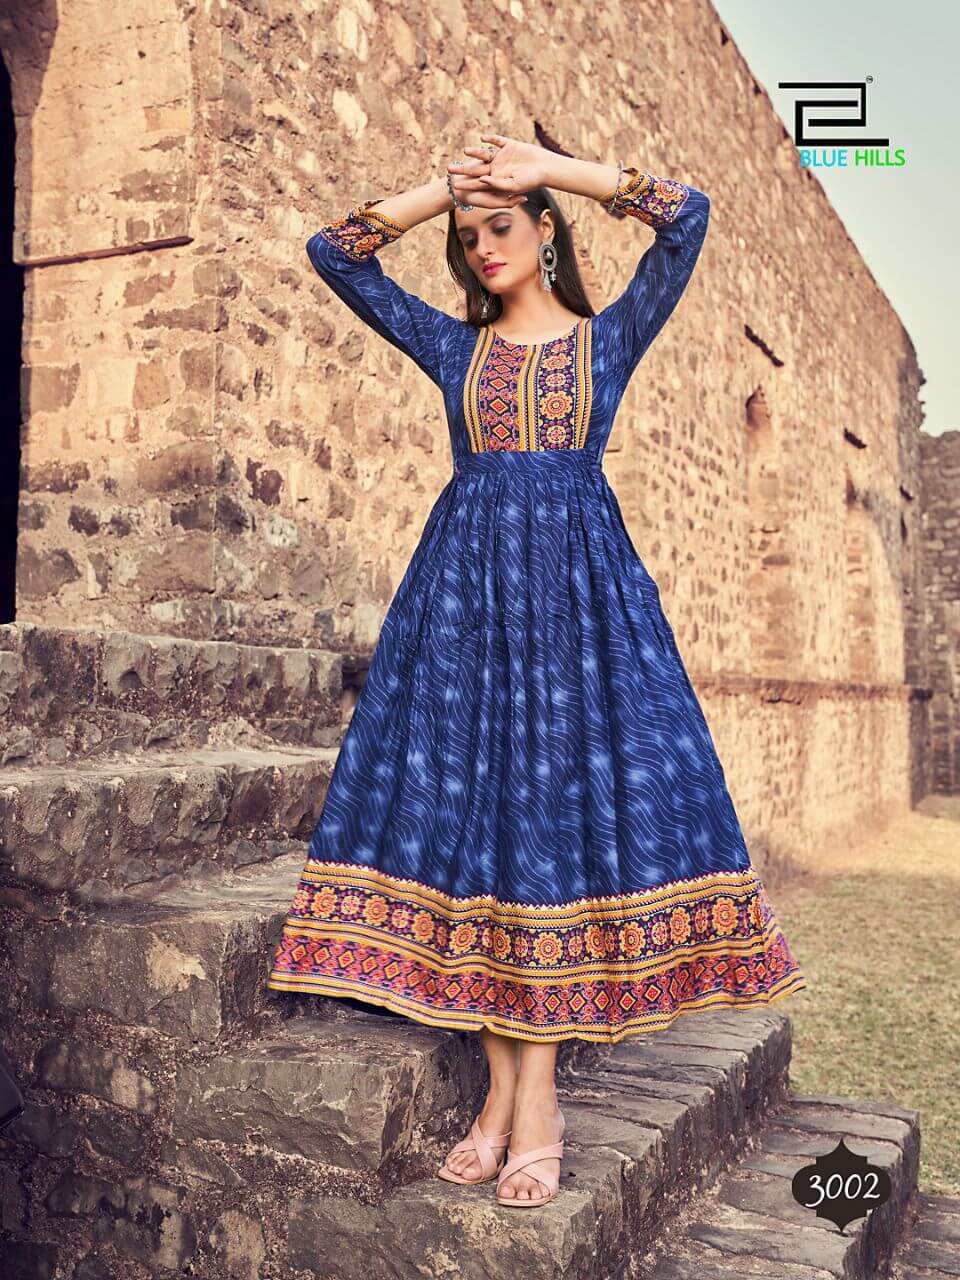 Blue Hills Monalisa vol 3 Gowns Catalog collection 2